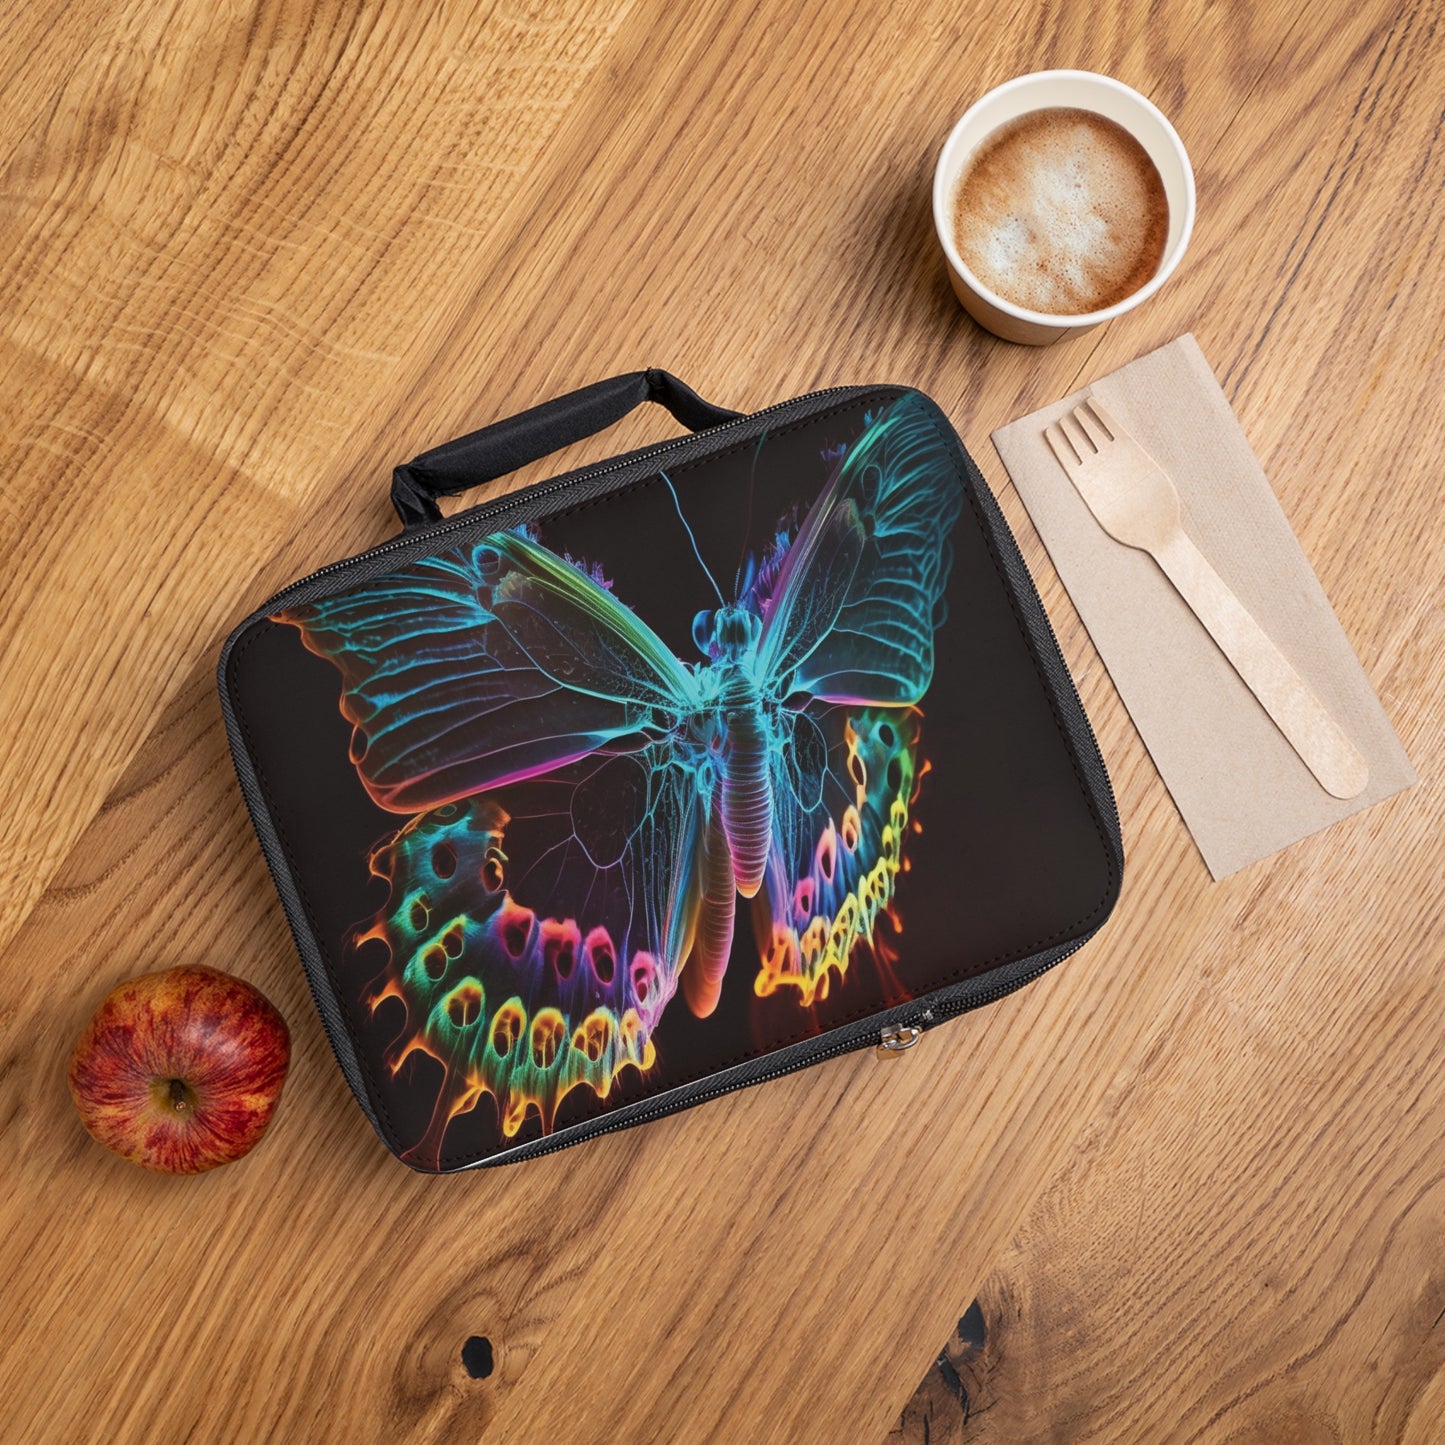 Lunch Bag Thermal Butterfly 2